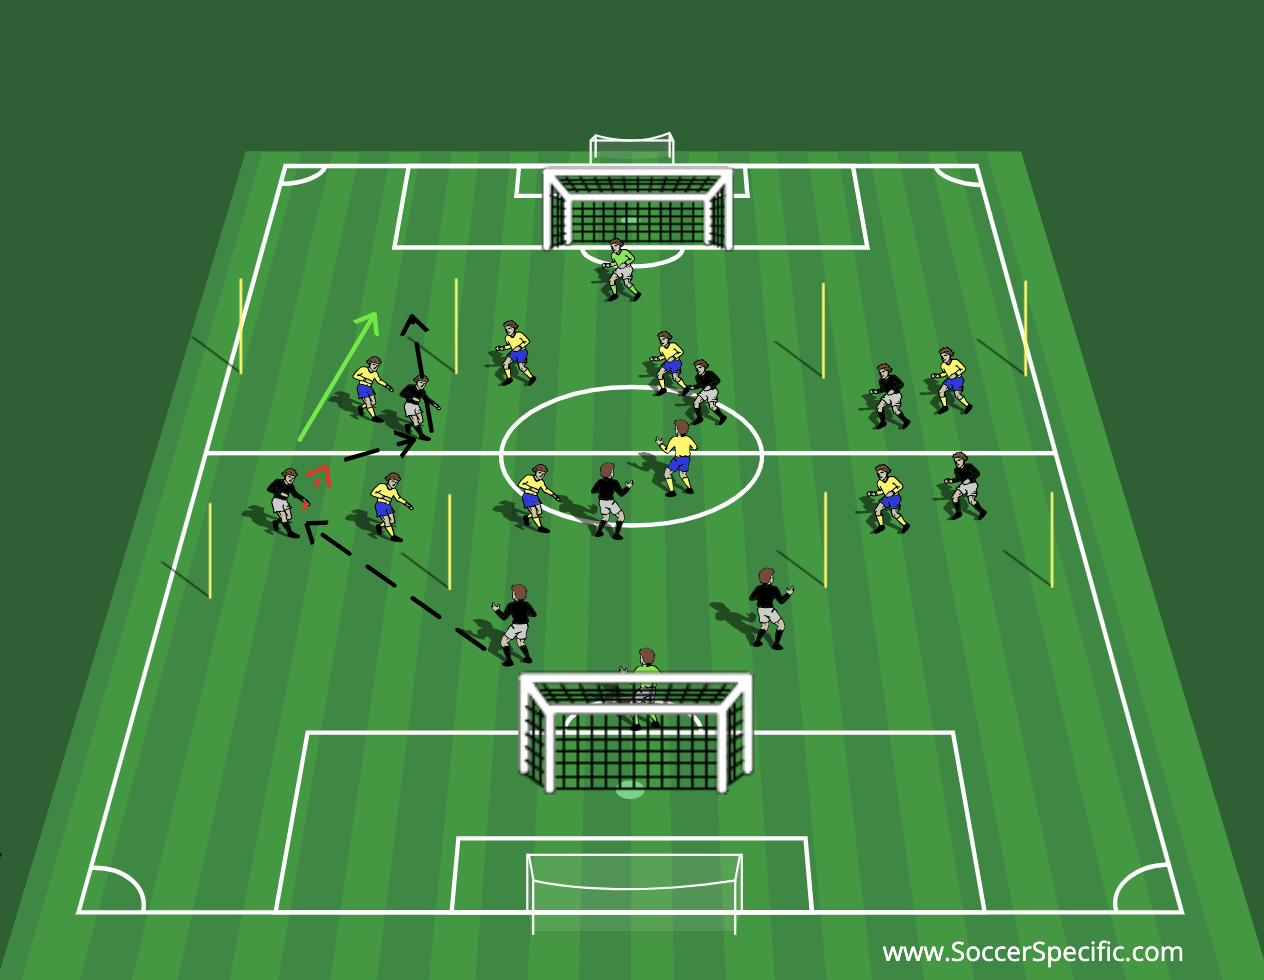 Wide Combinations Positional Game 8V8 | SoccerSpecific.com